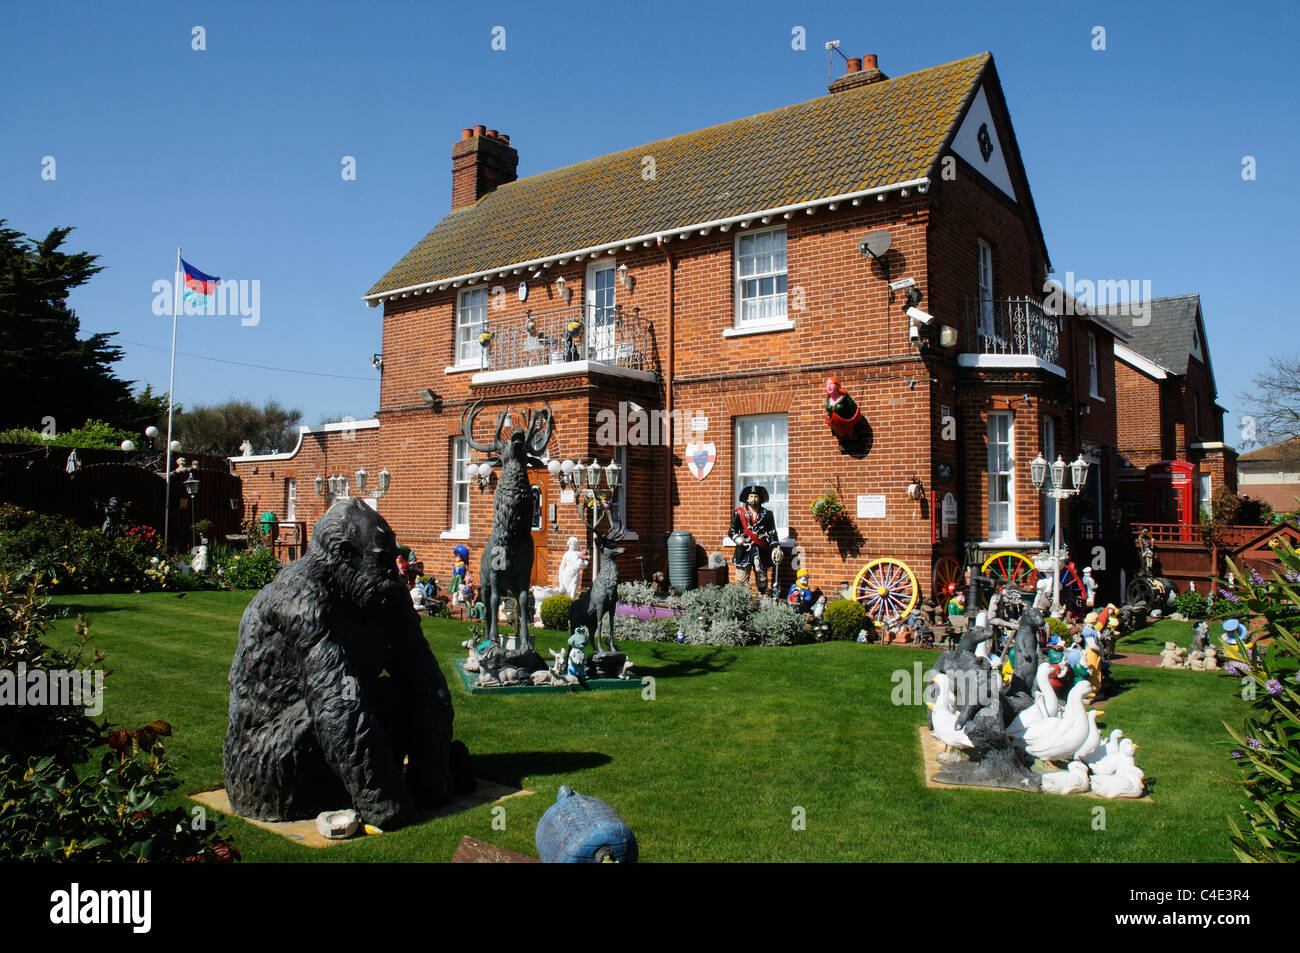 A house with lots of statues in the garden in Clacton Essex Stock Photo